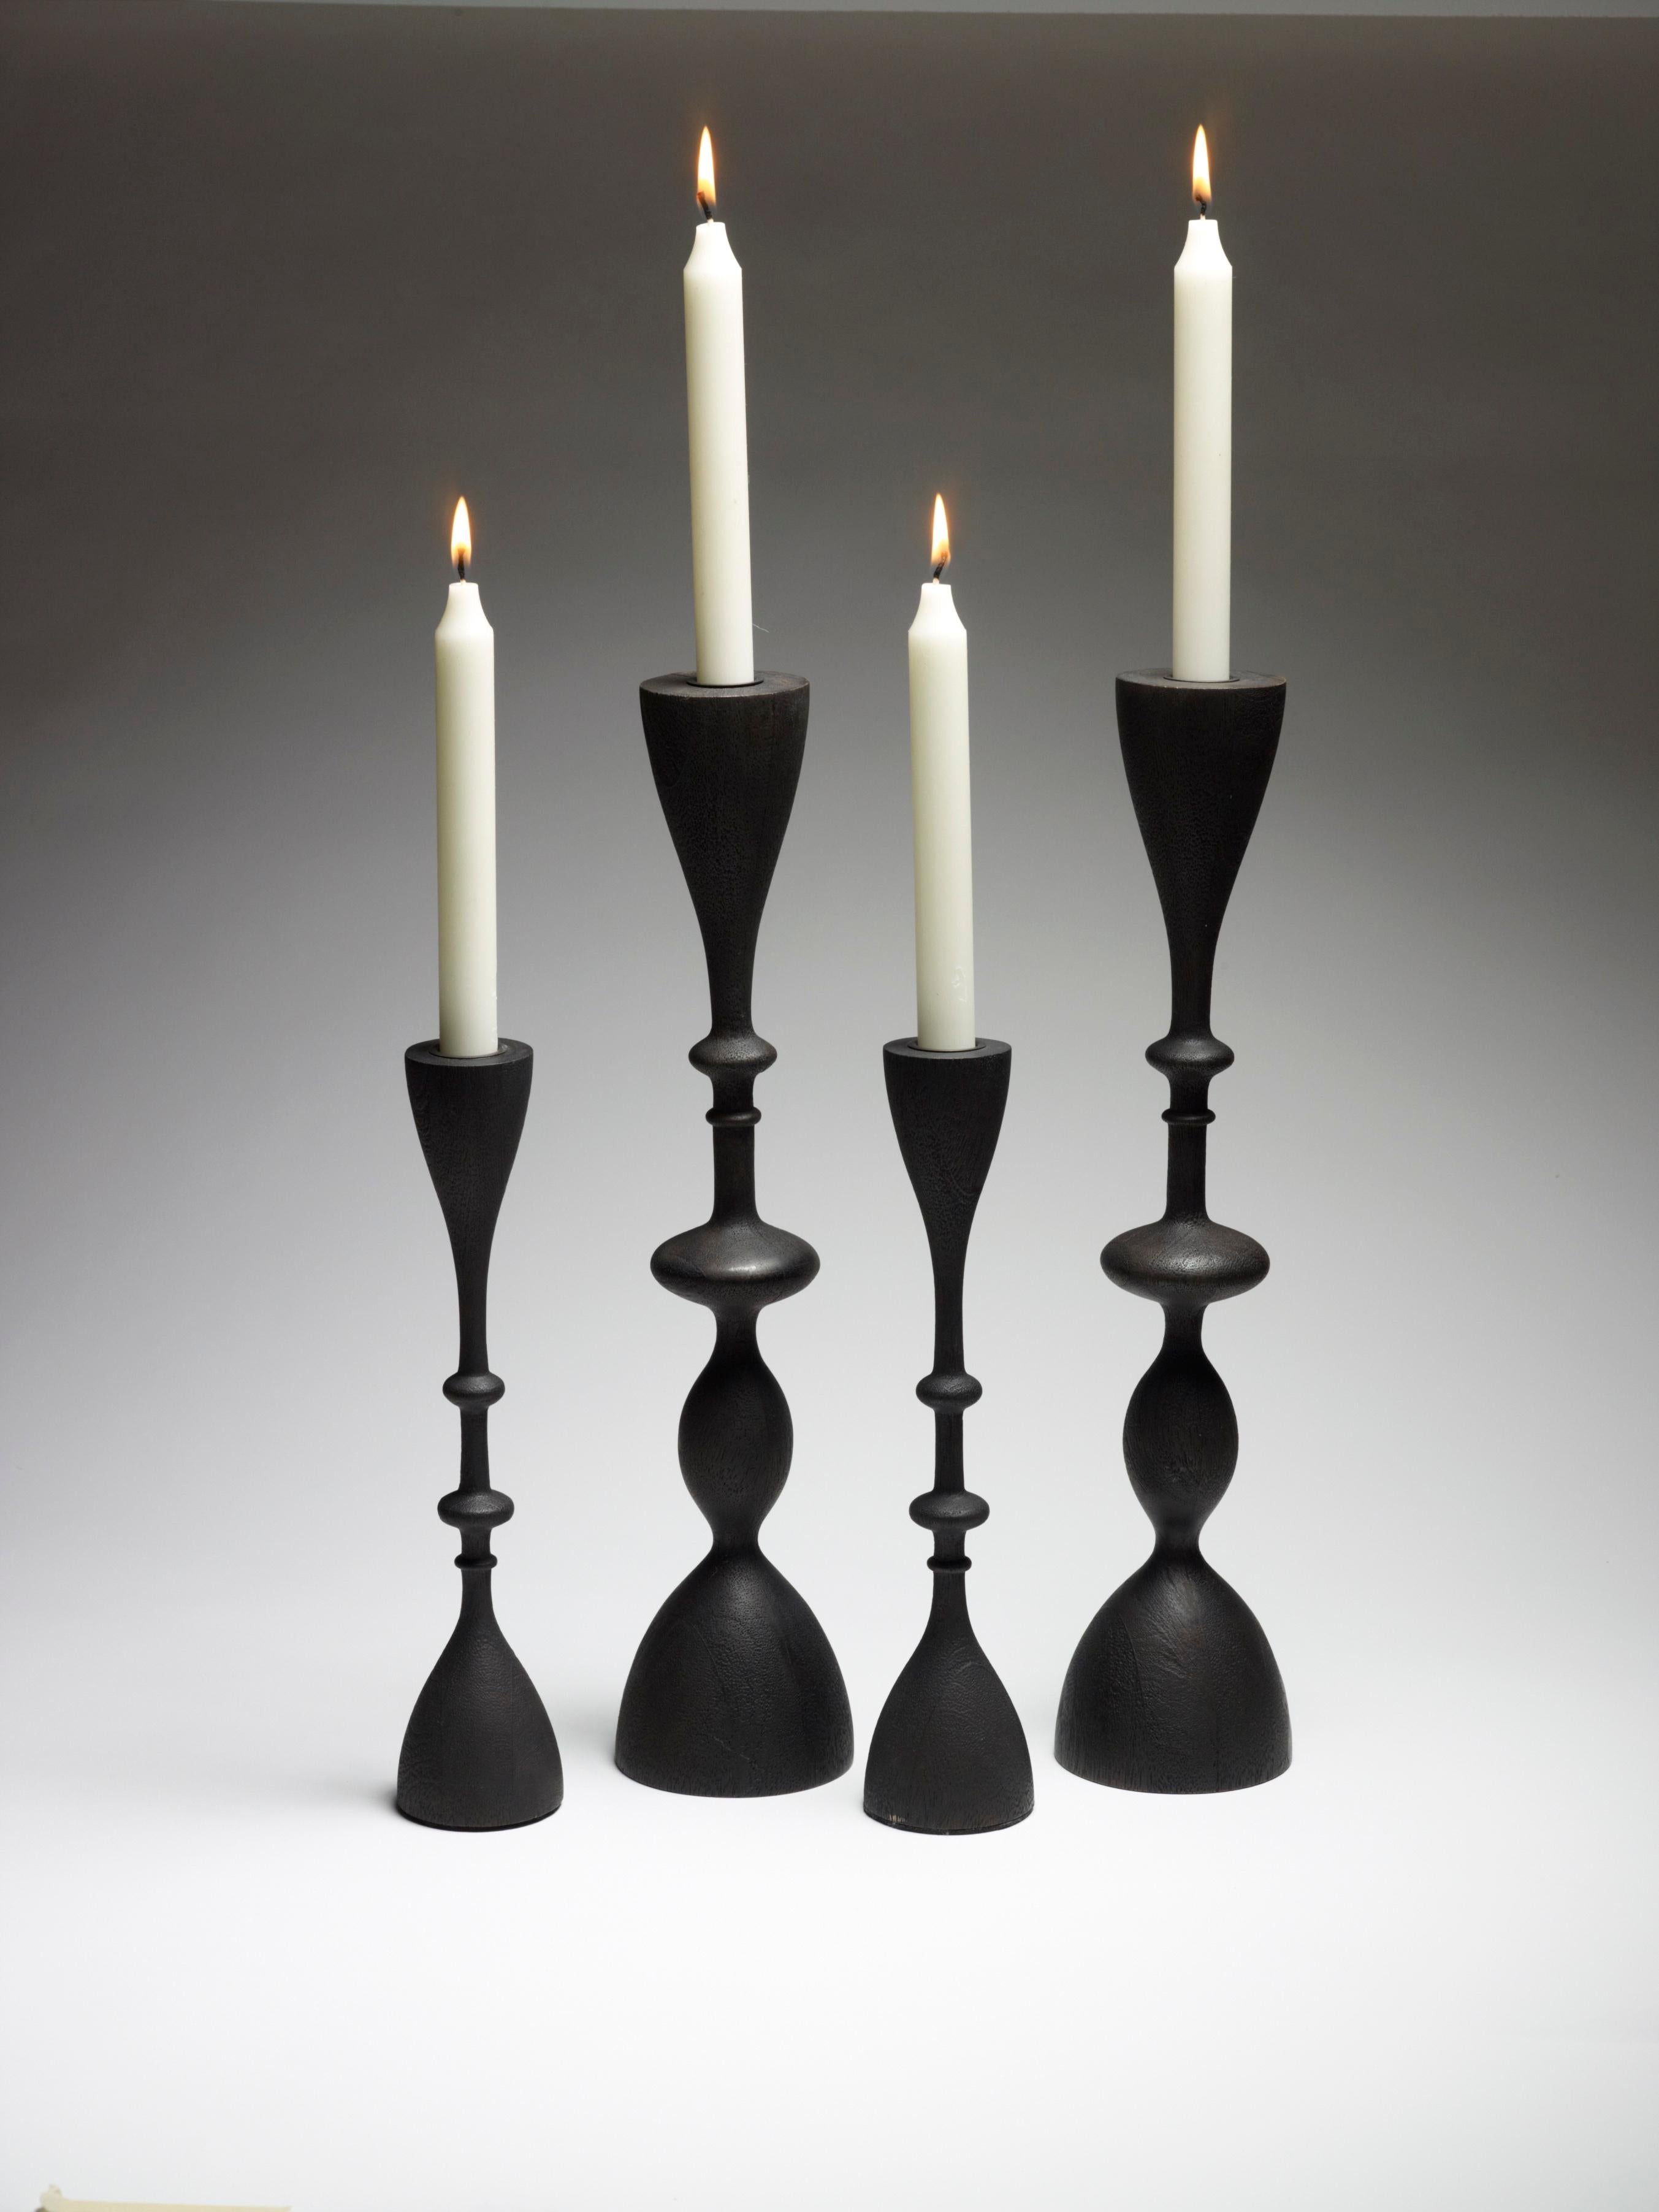 Wave Candlestick (single candlestick, large, blackened) For Sale 6